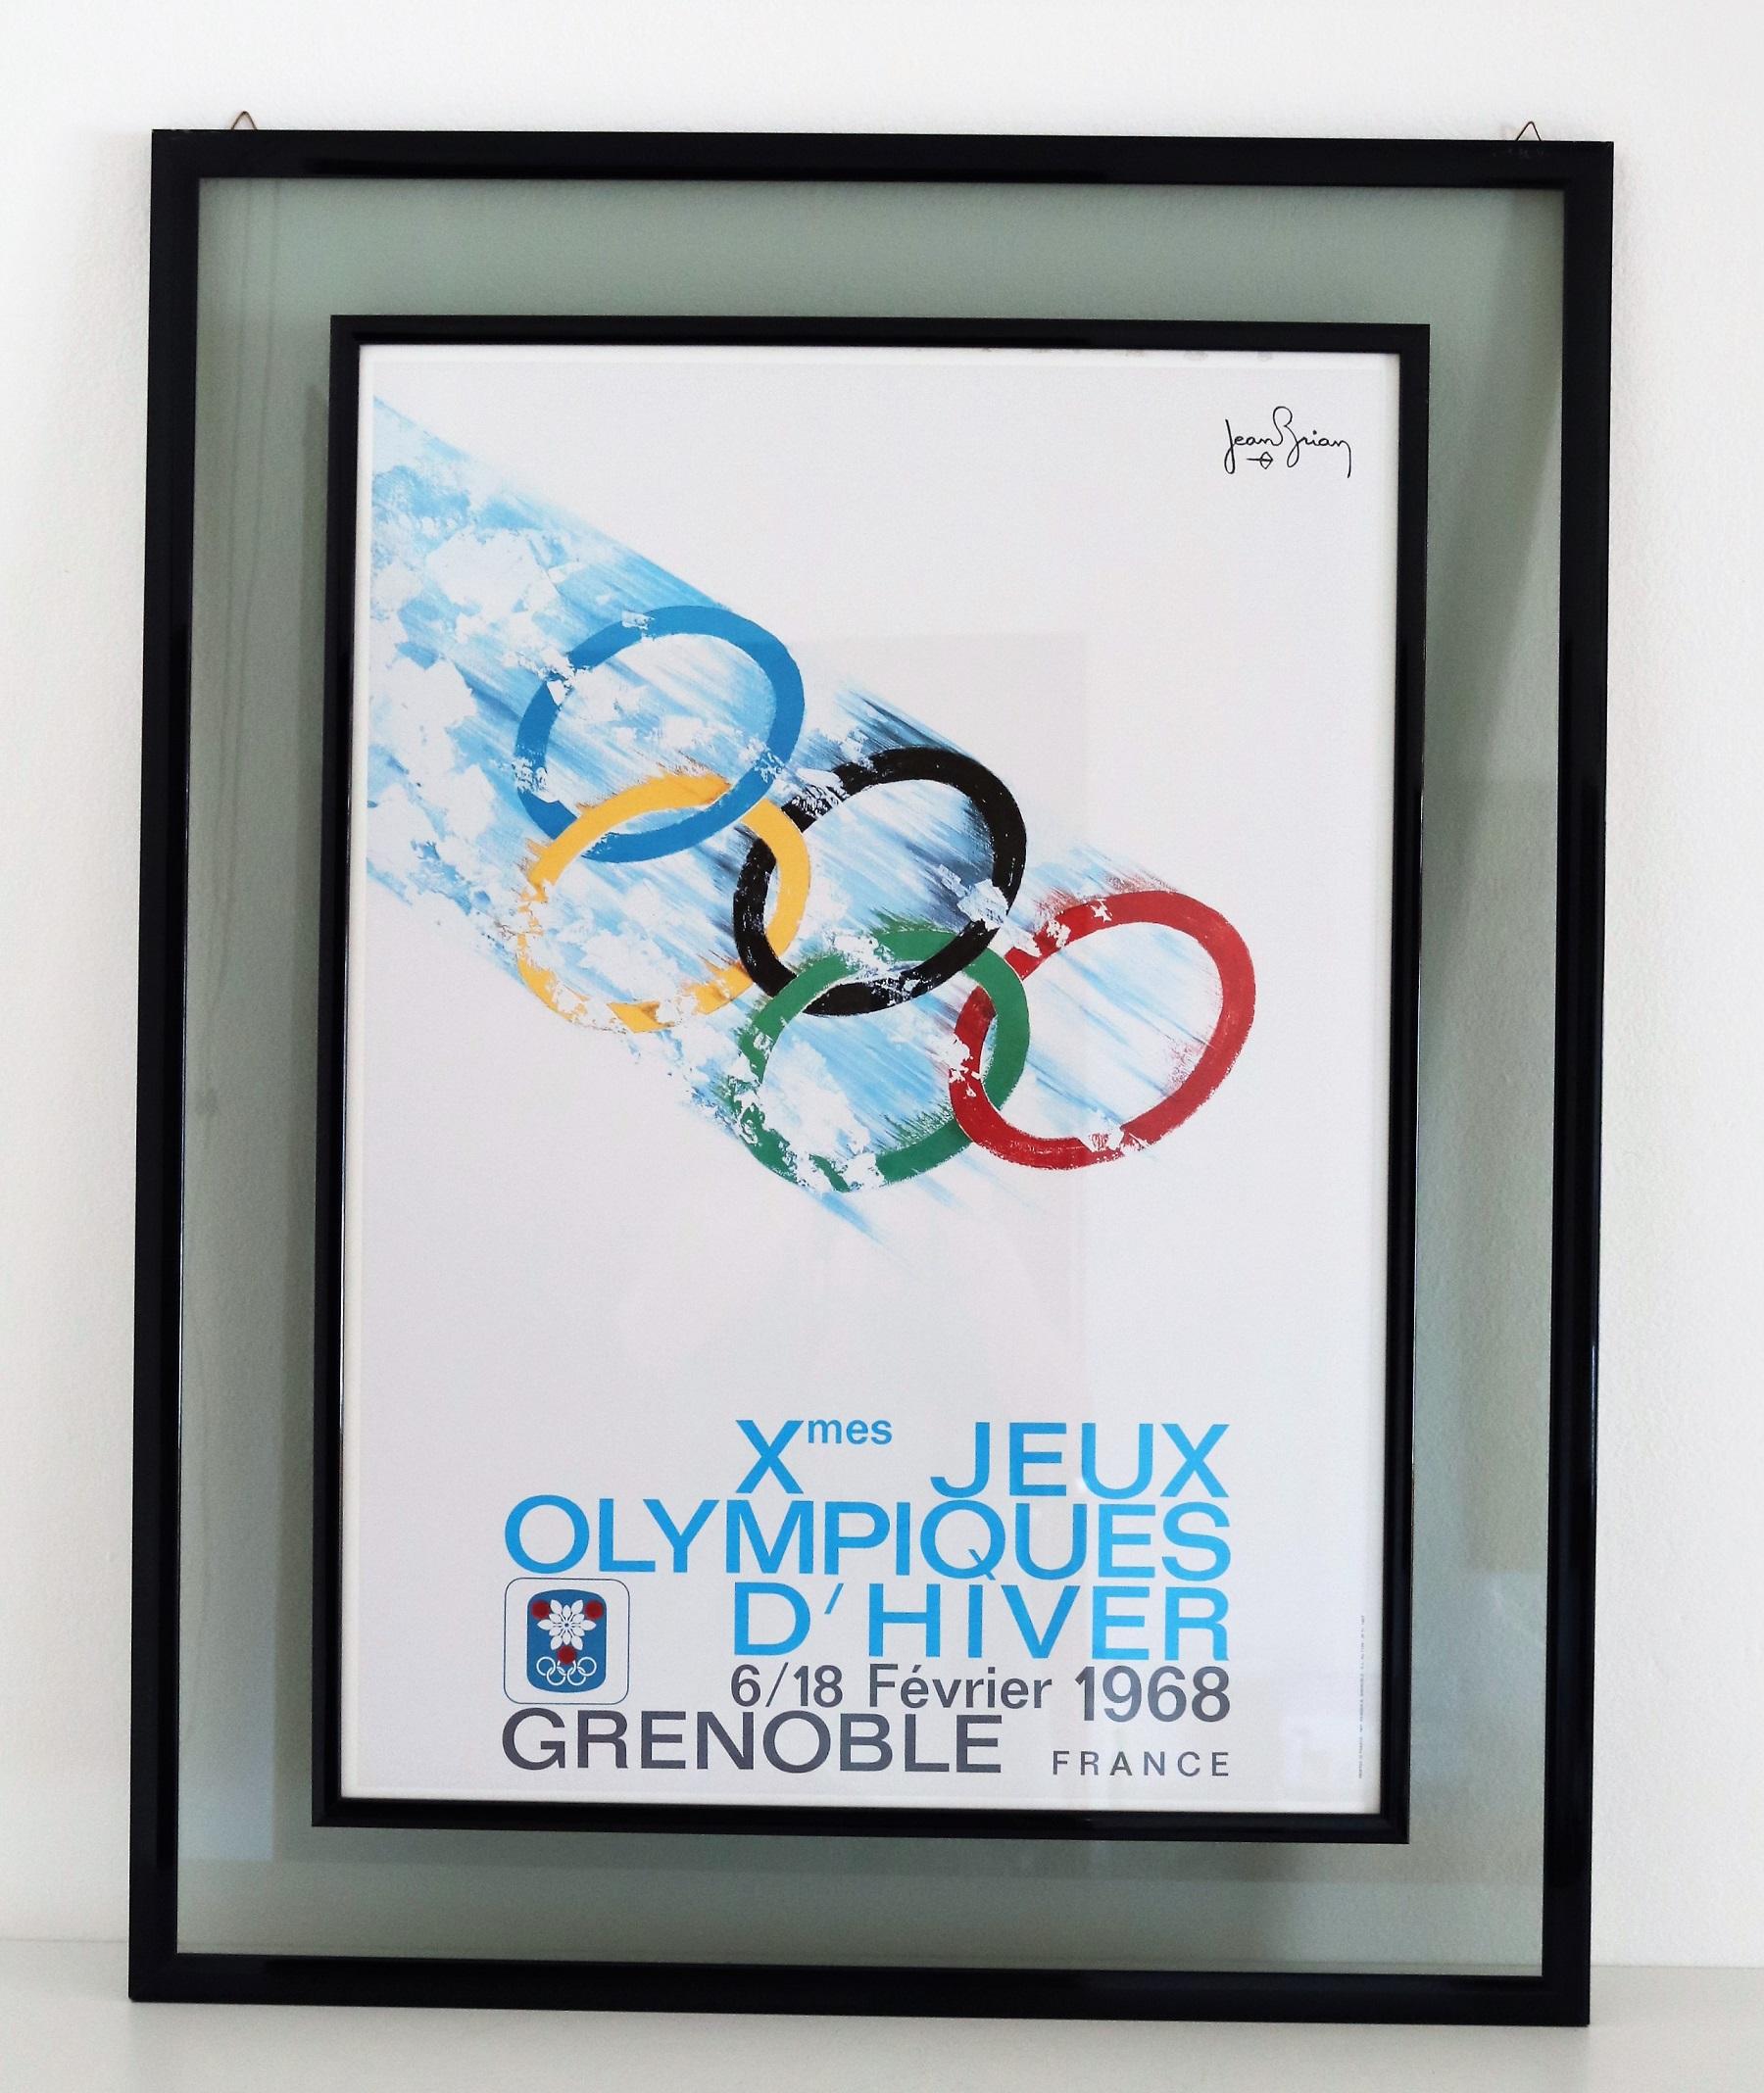 Beautiful wall art of a vintage poster designed by Jean Brian (1910-1990) for the winter Olympic Games in Grenoble, France, in February 1968.
The poster is in very good condition and comes with its original wood and double glass frame in blue